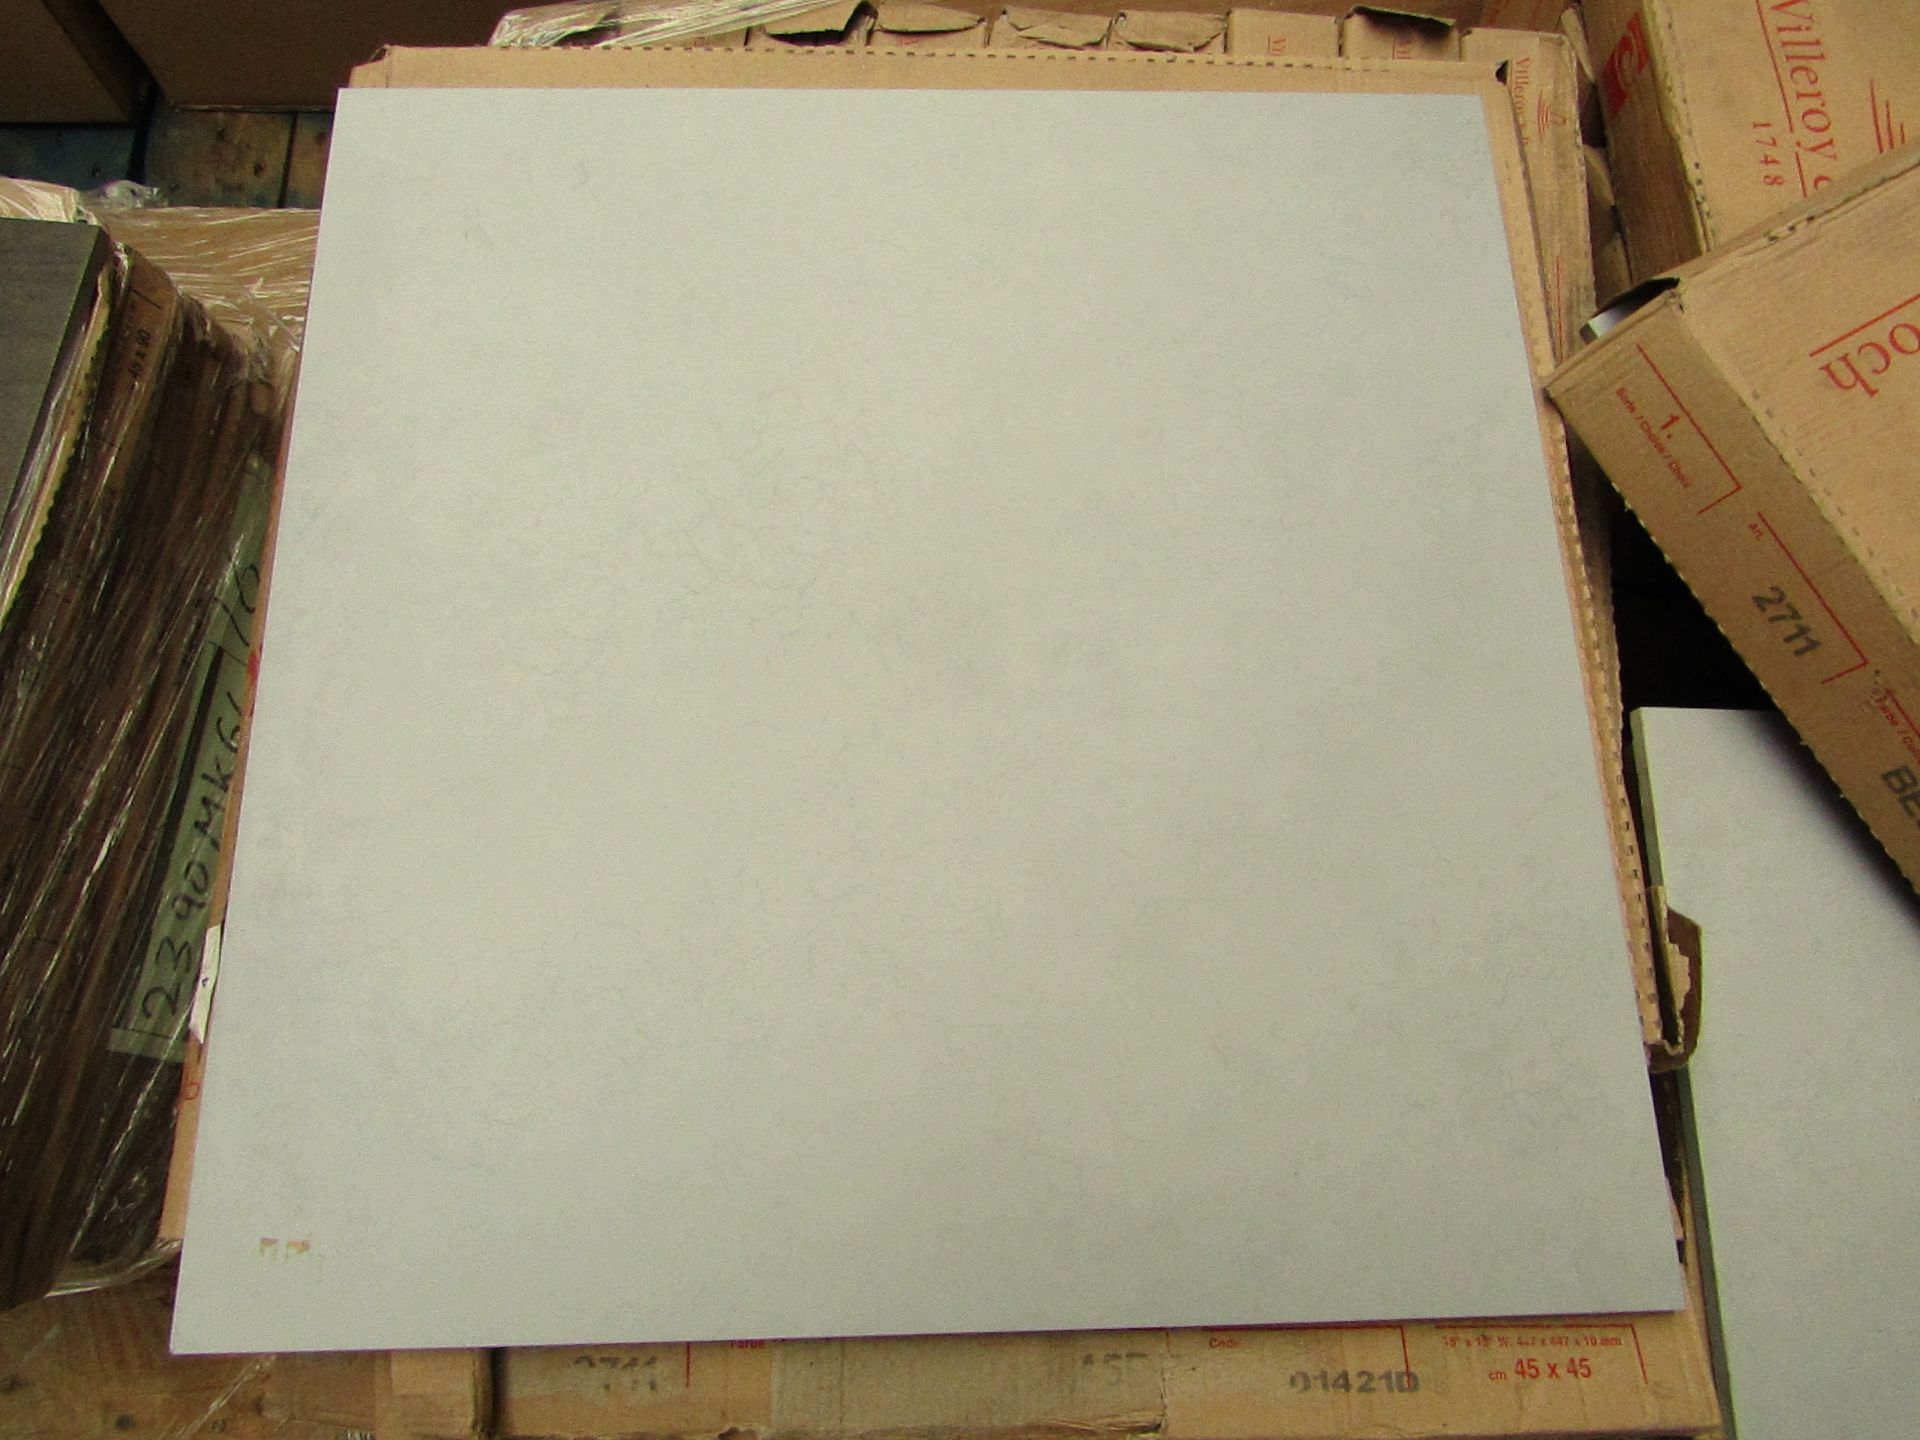 31x Packs of 450 x 450 Villeroy and Boch 01421 Grey Tiles, RRP £39.89 a Pack Giving a total lot